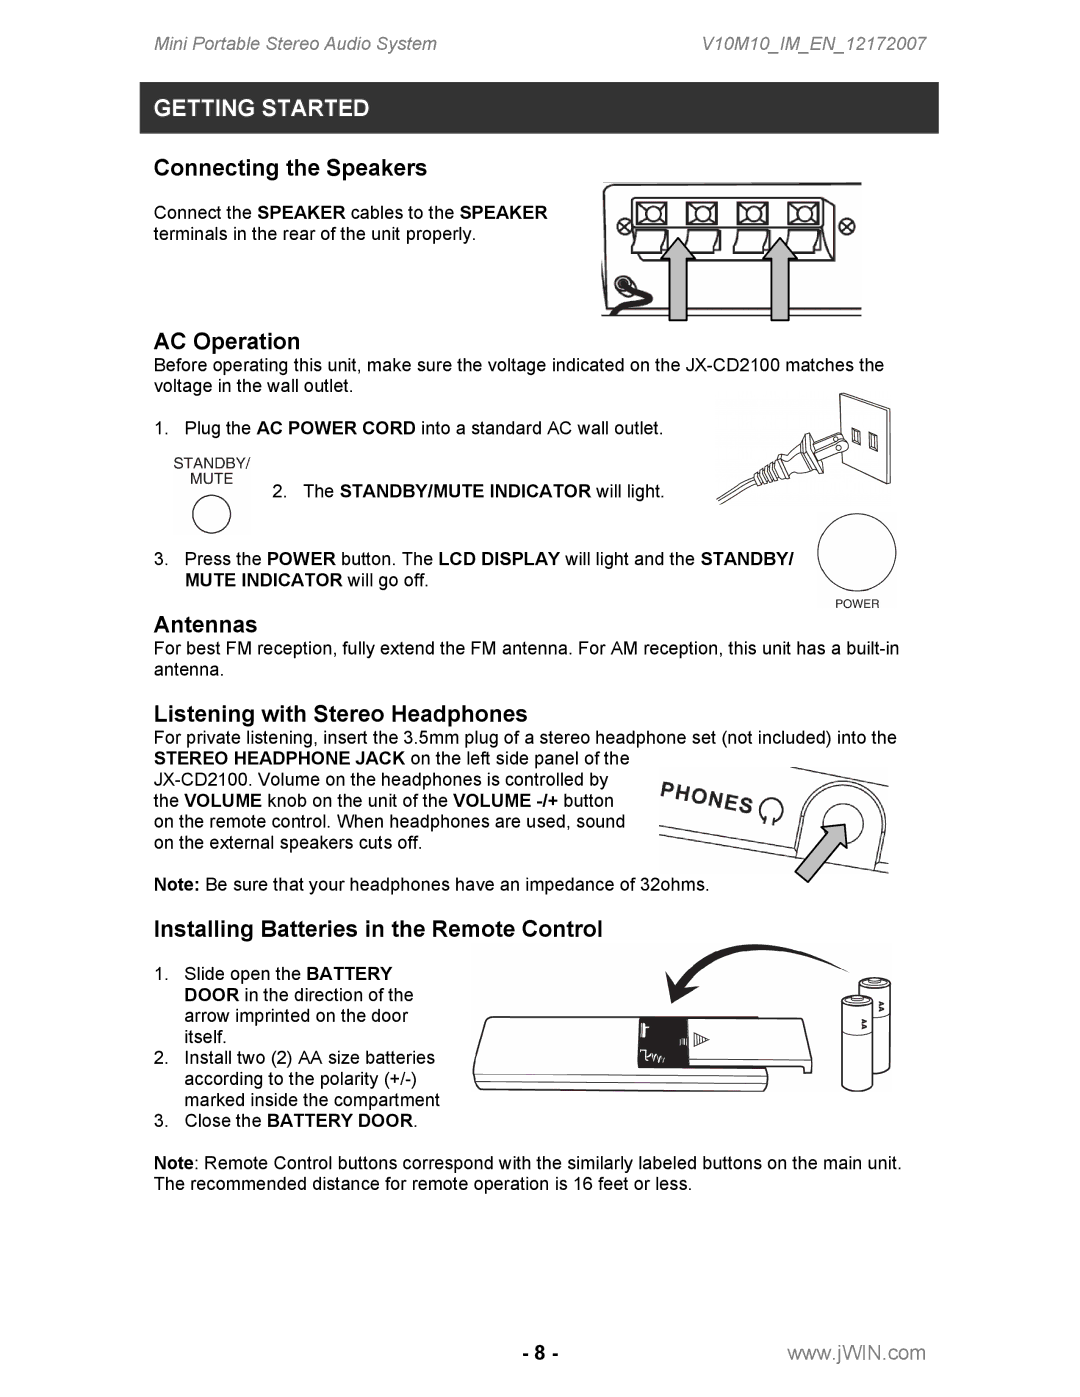 Jwin JX-CD2100 instruction manual Connecting the Speakers, AC Operation, Antennas, Listening with Stereo Headphones 